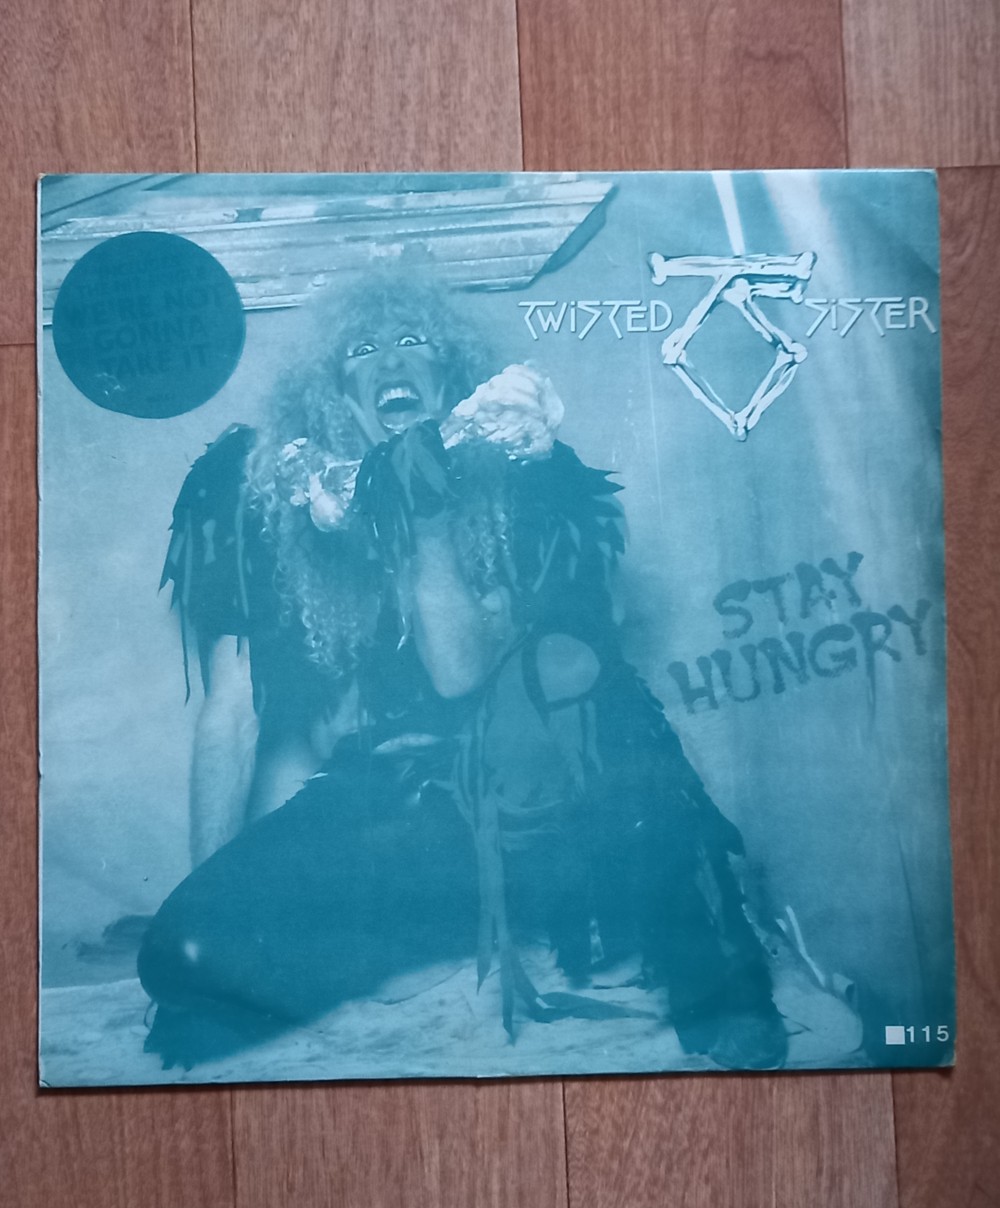 Twisted Sister - Stay Hungry Vinyl Photo | Metal Kingdom